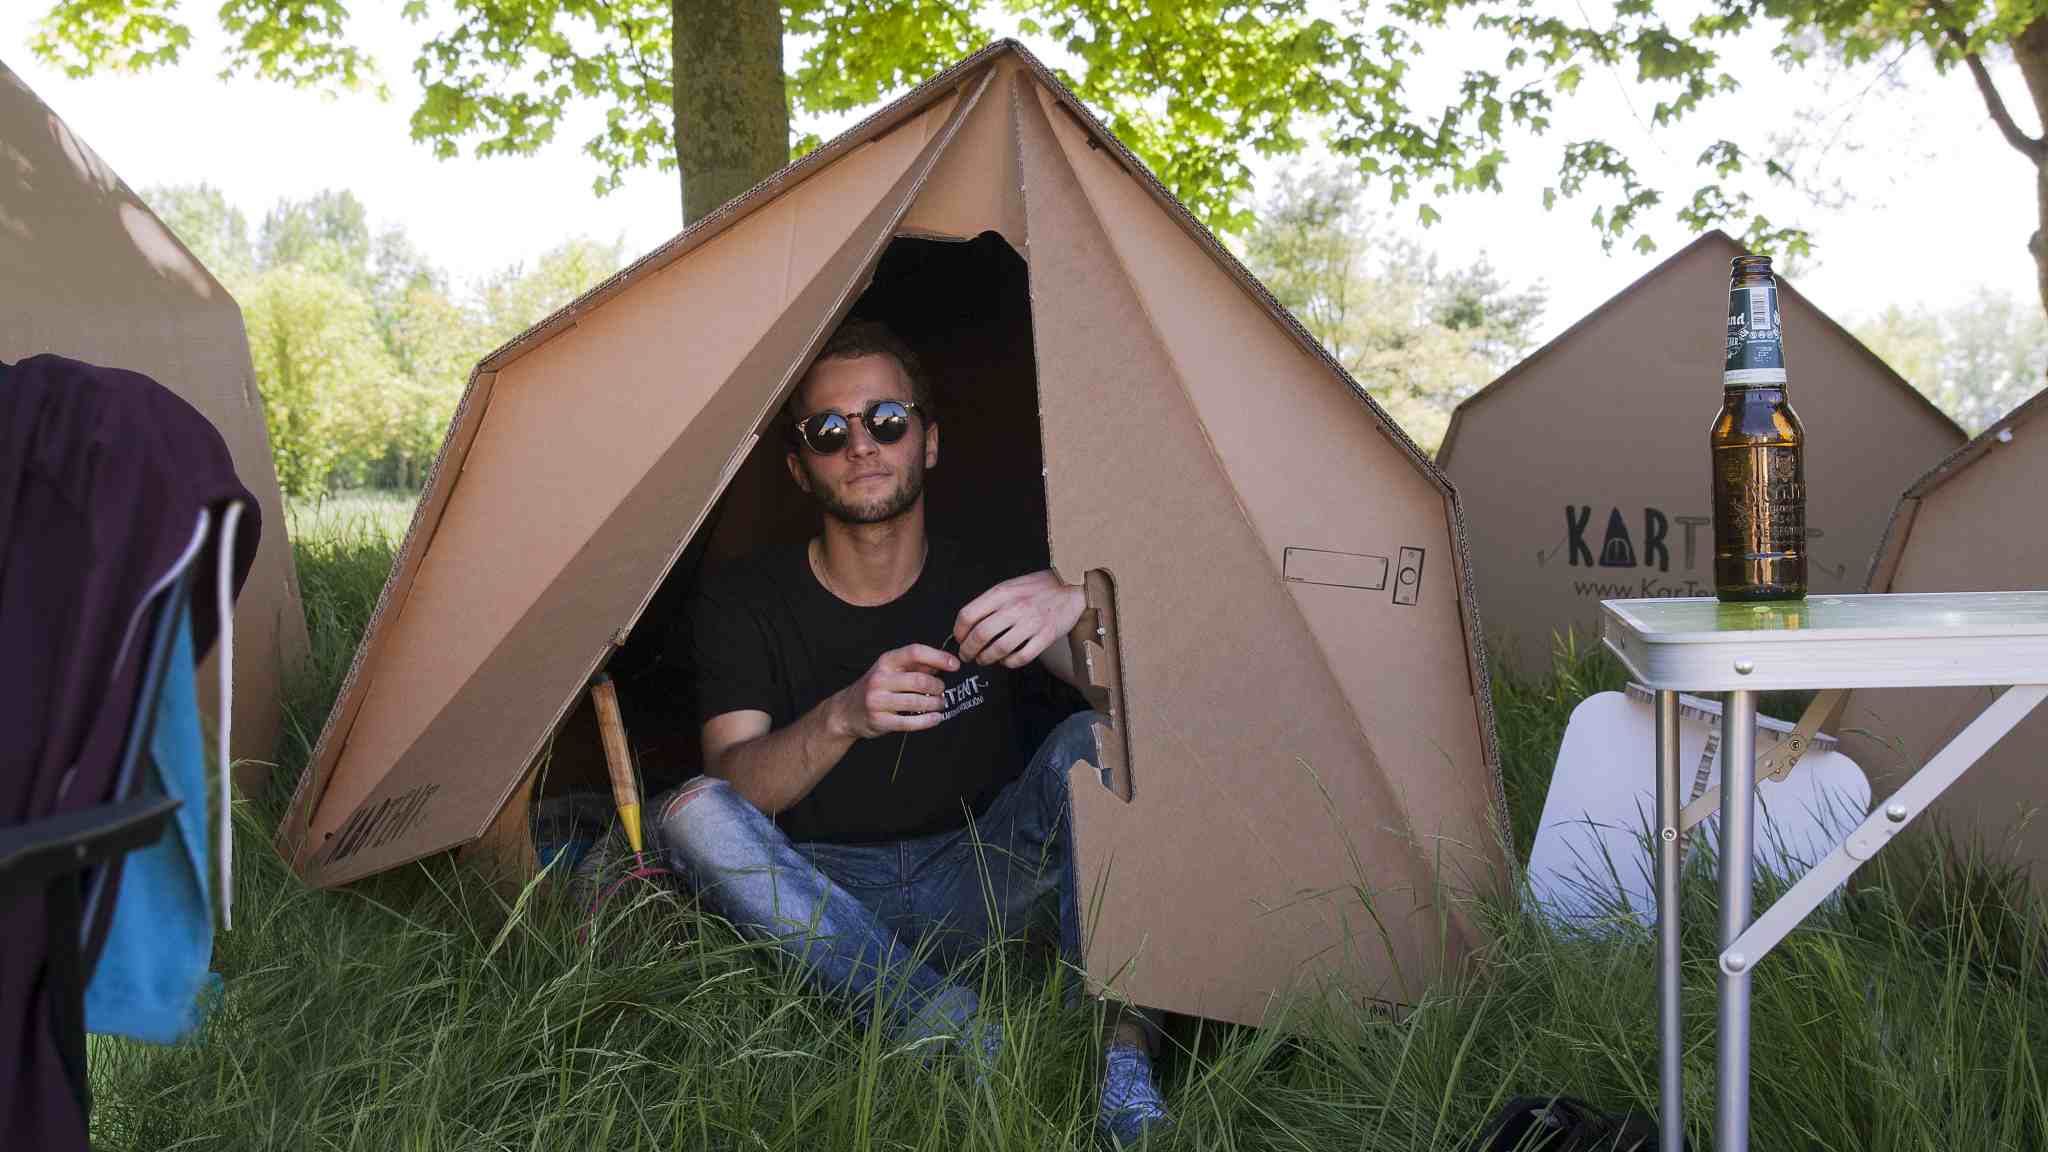 Gezond rem Beraadslagen Recyclable cardboard tents pitch up at music festivals - CGTN